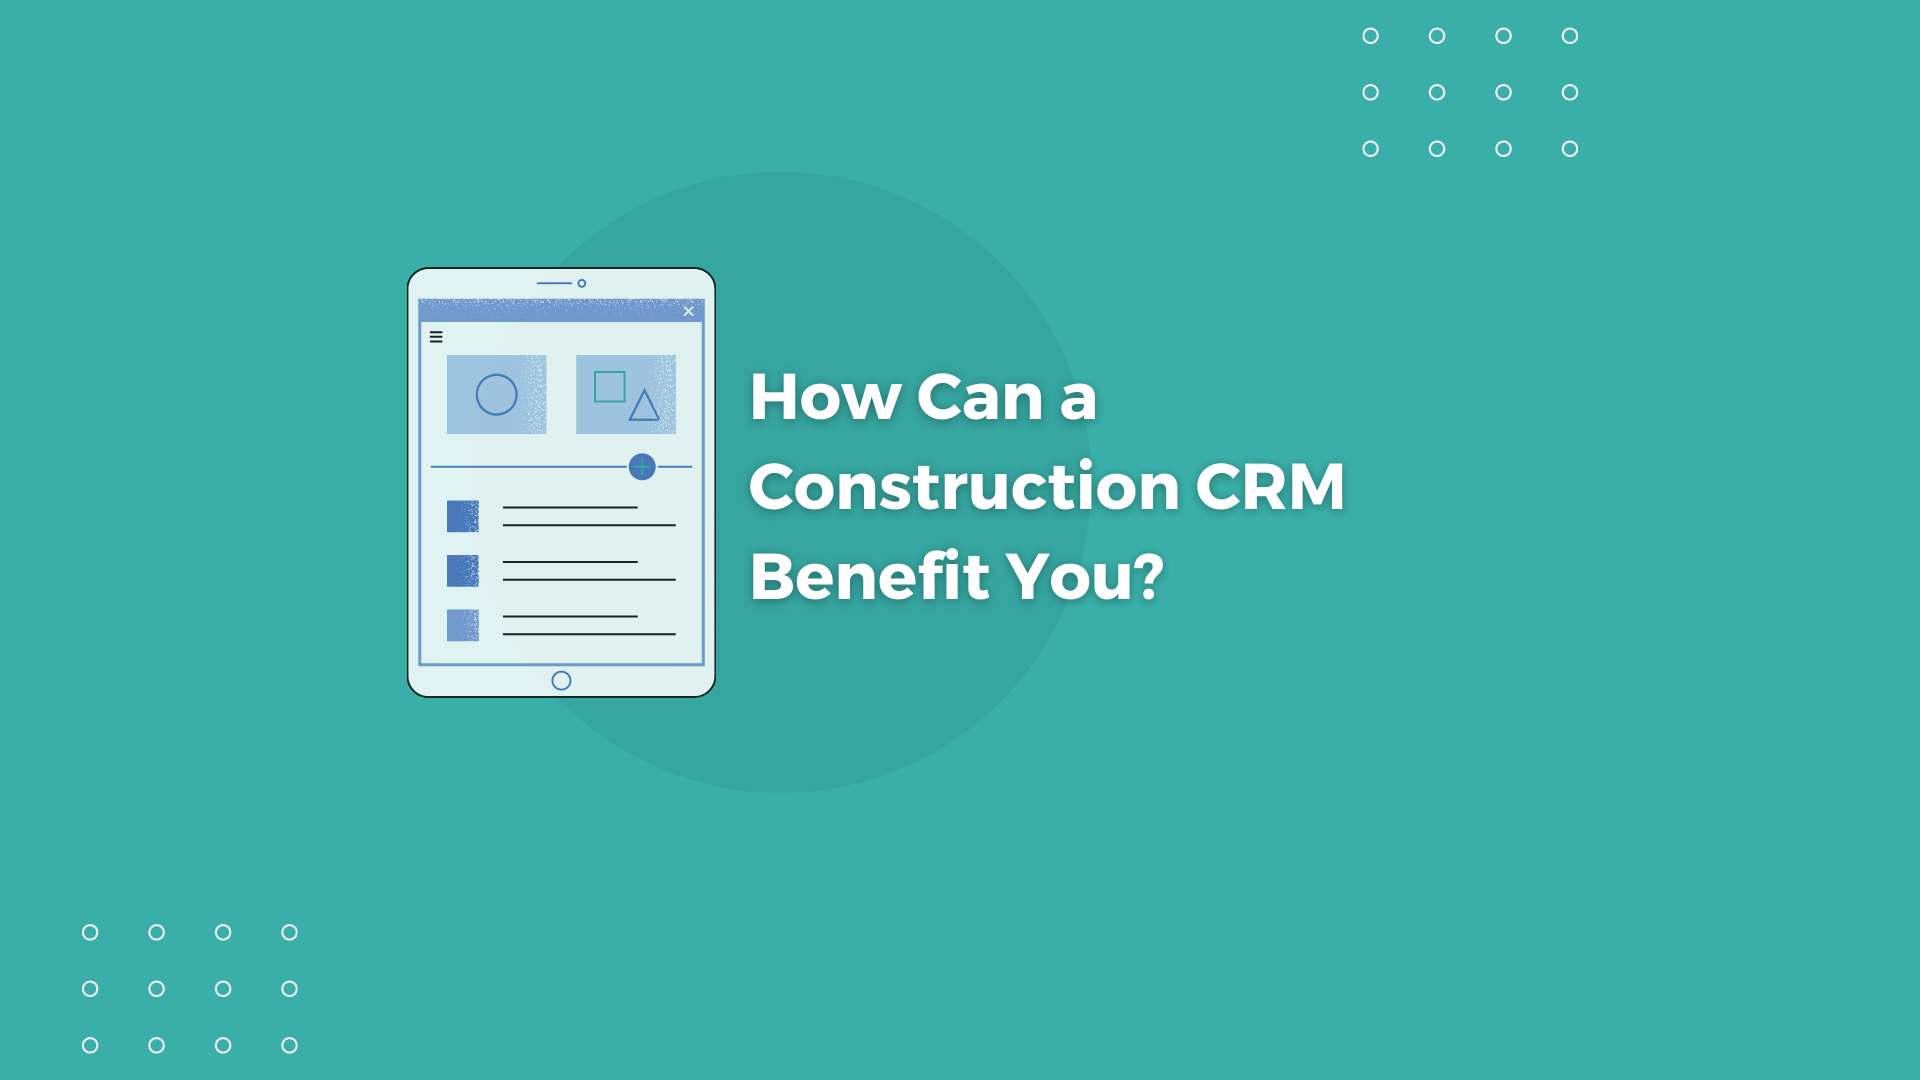 How Can a Construction CRM Benefit You?